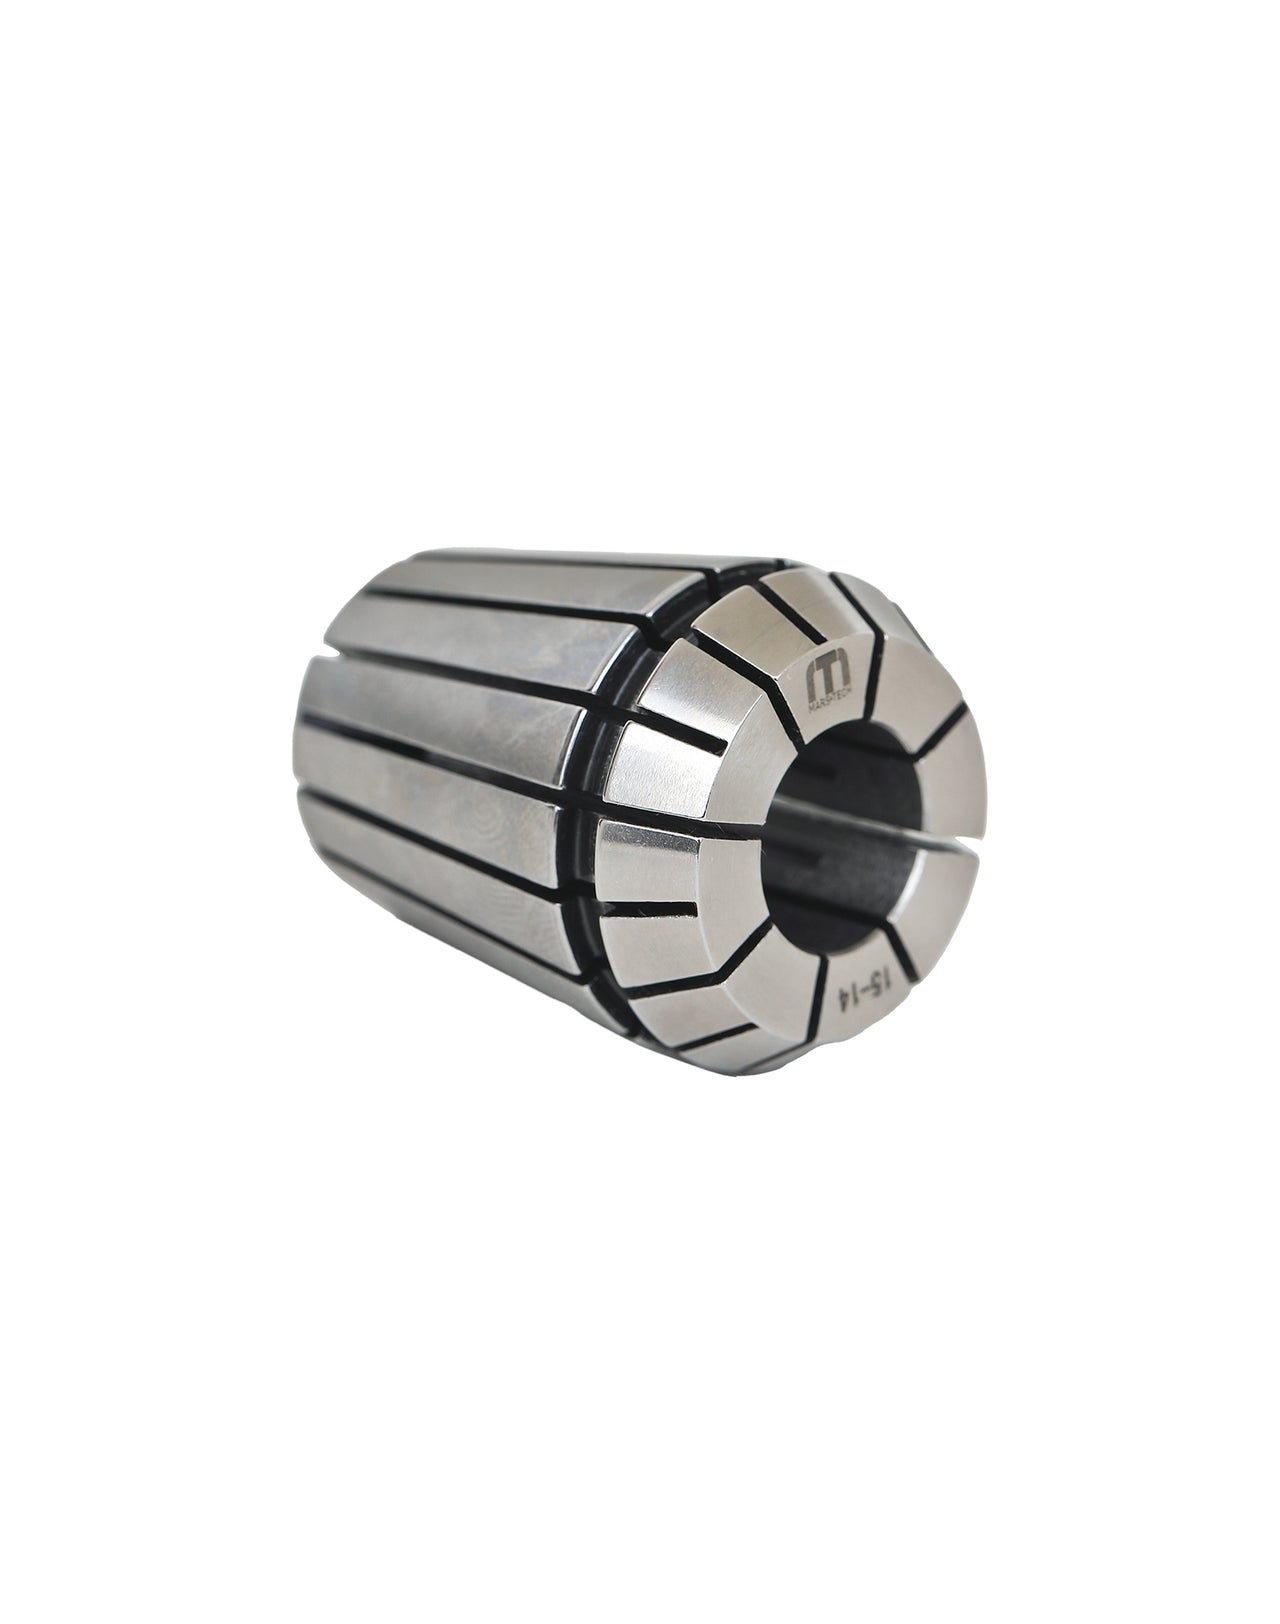 ER40 Collet Ultra high precision 0.005 AAA quality